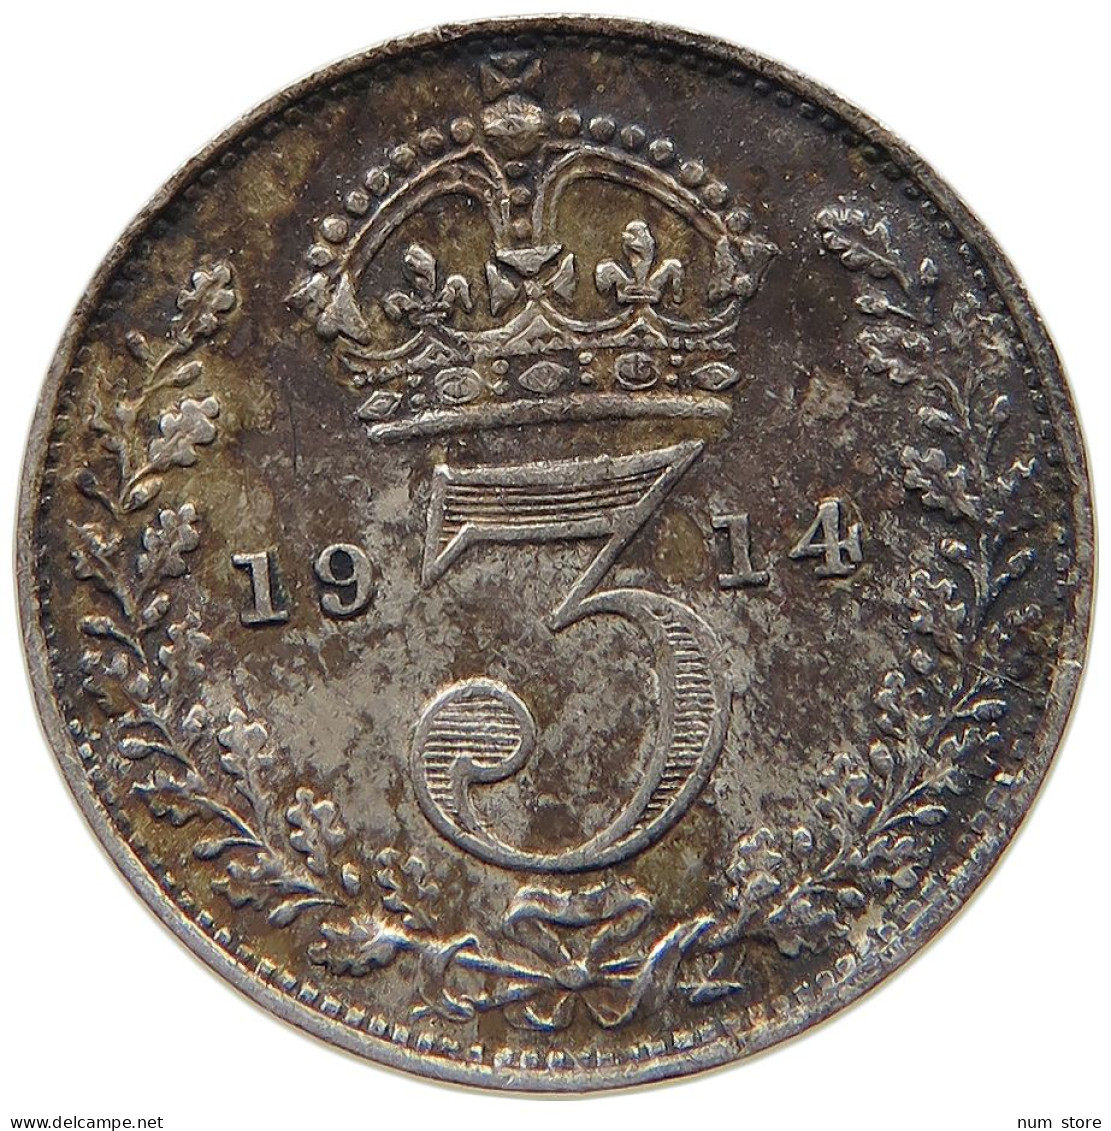 GREAT BRITAIN THREEPENCE 1914 George V. (1910-1936) #c036 0303 - F. 3 Pence